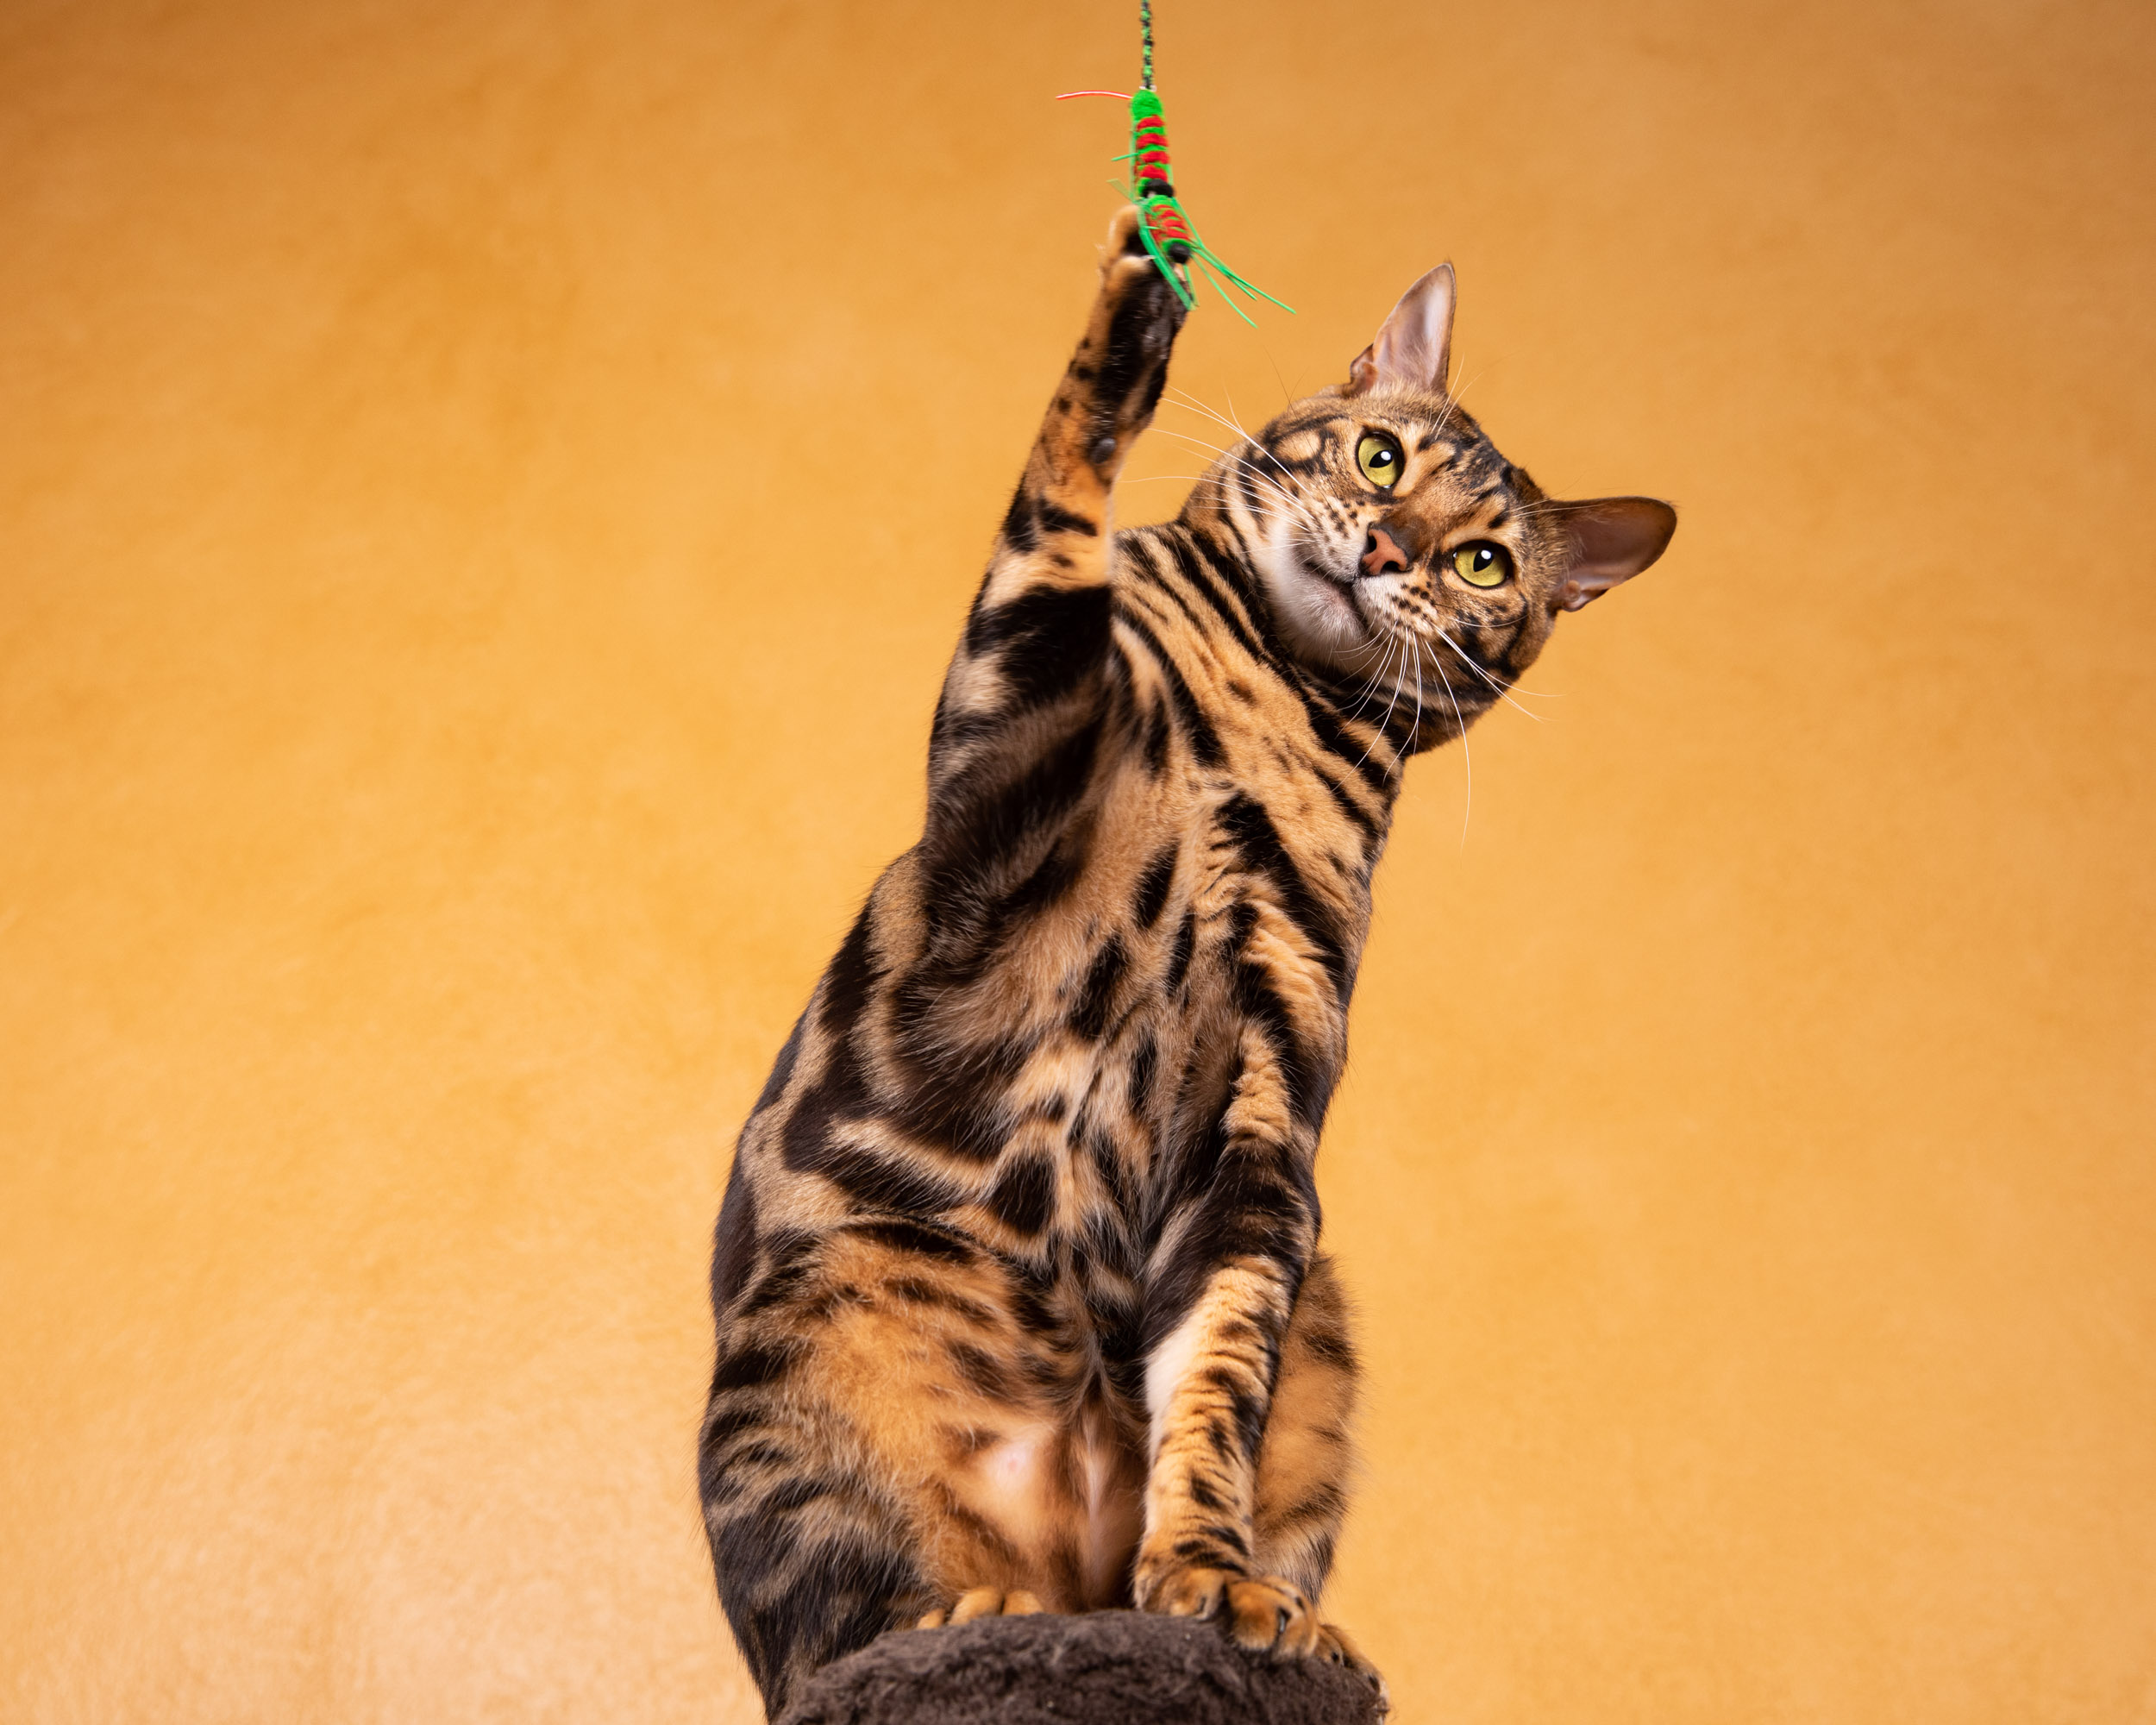 Cat Studio Photography | Bengal Cat Reaching for Toy by Mark Rogers